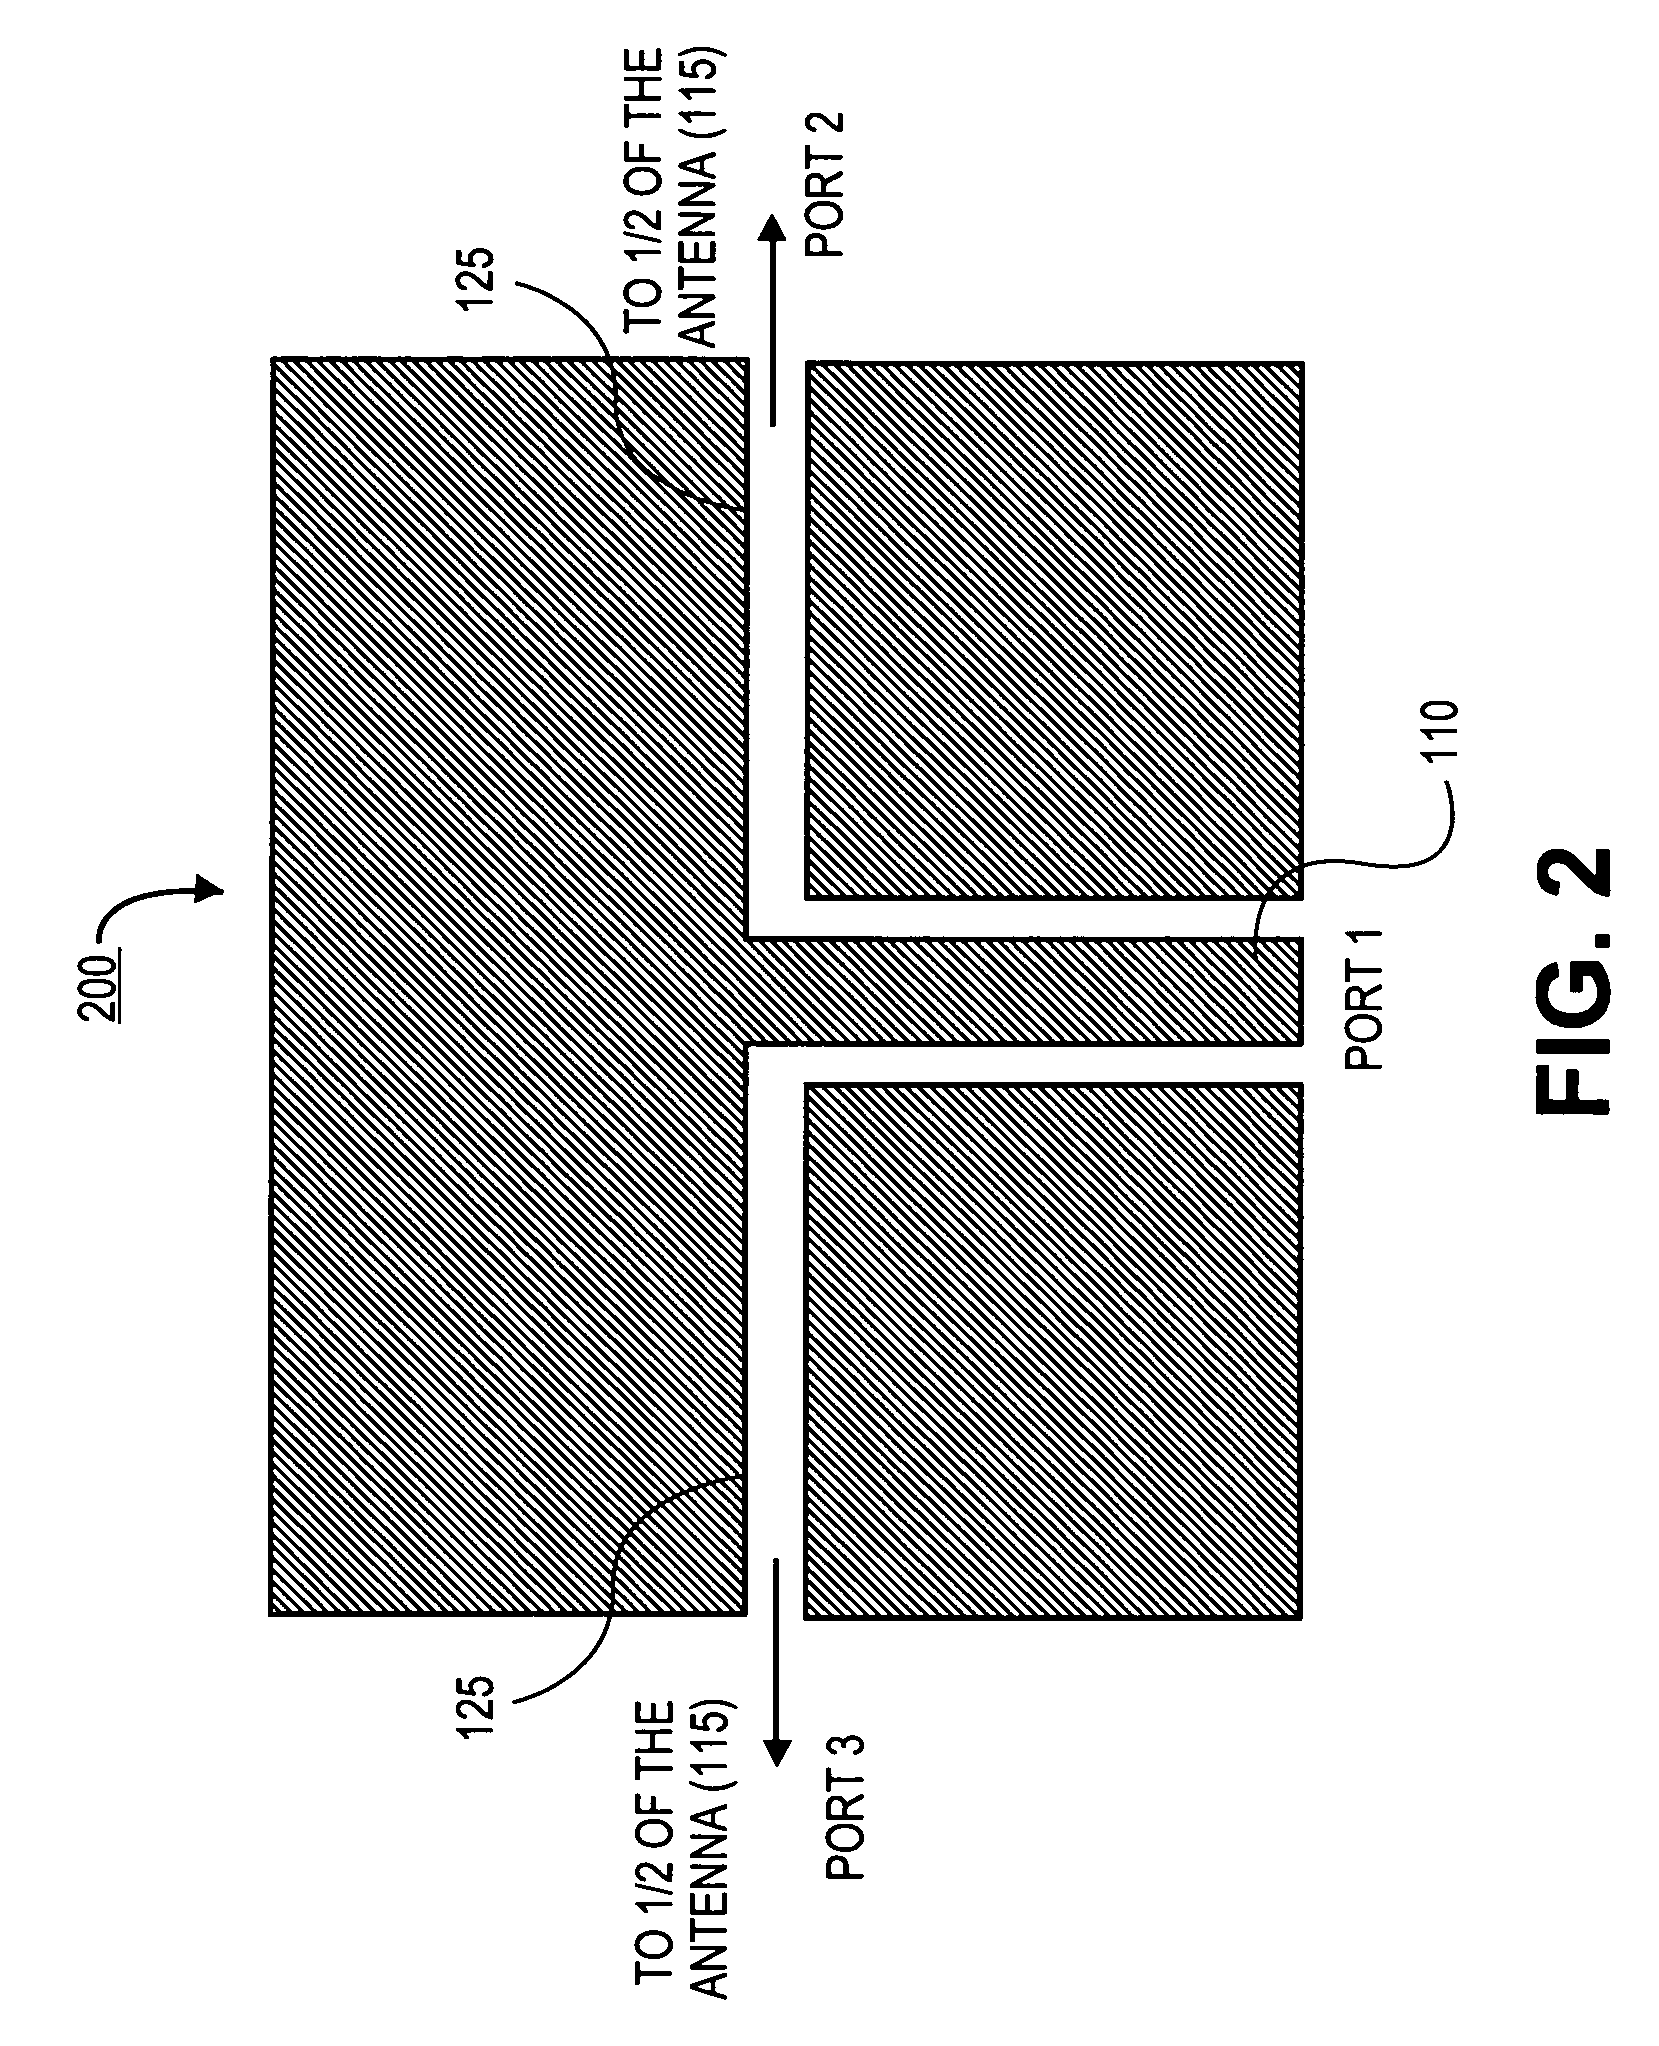 System and apparatus for a wideband omni-directional antenna